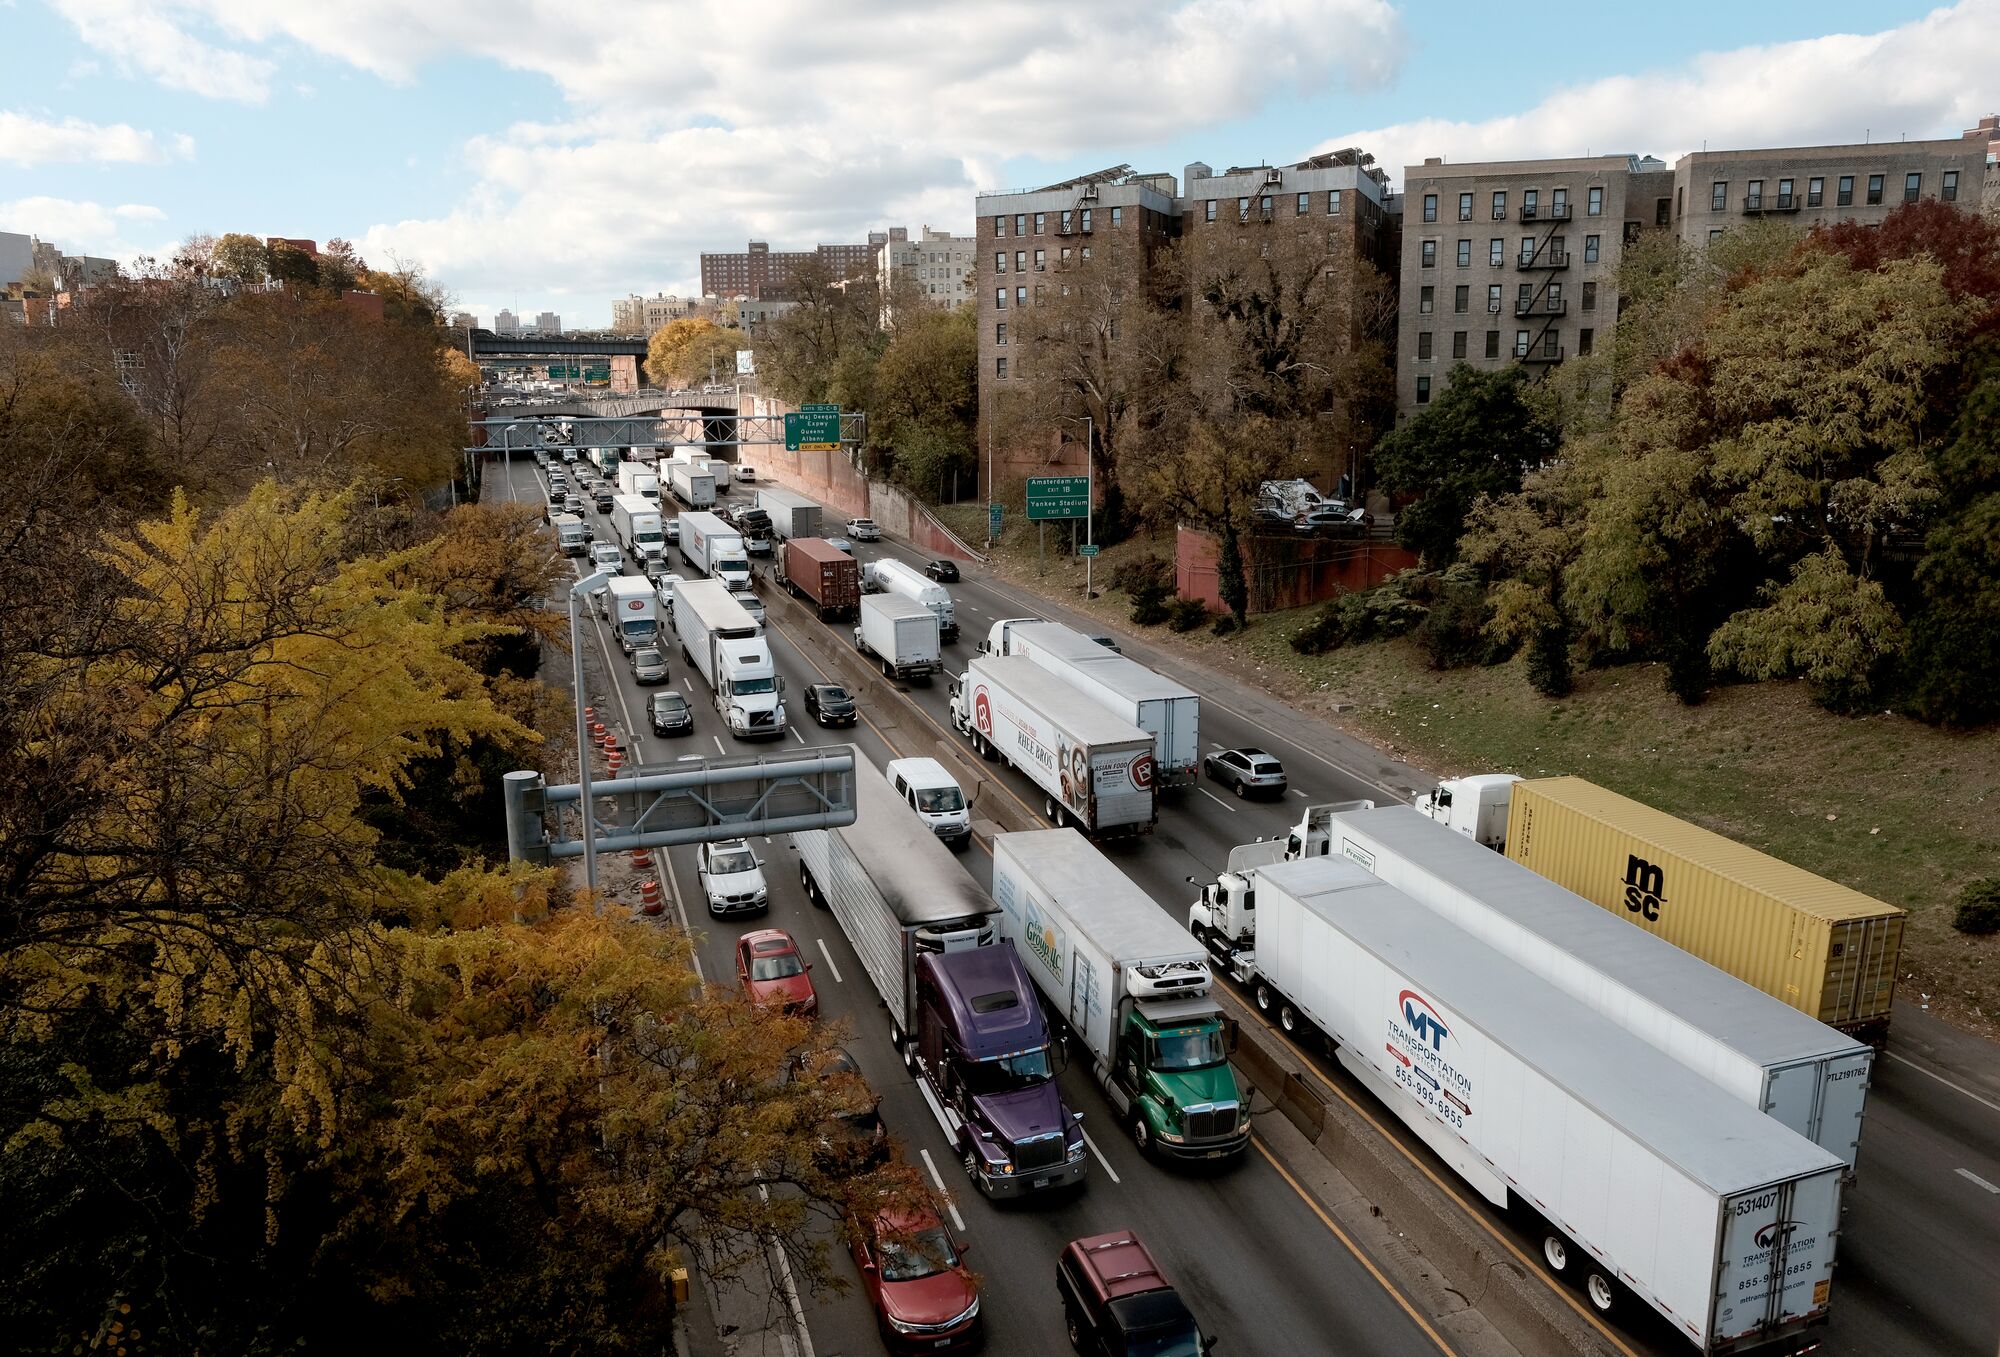 Cars and trucks move along the Cross Bronx Expressway, a notorious stretch of highway in New York City that is often choked with traffic and contributes to pollution and poor air quality on November 16, 2021 in New York City. (Spencer Platt / Getty Images)